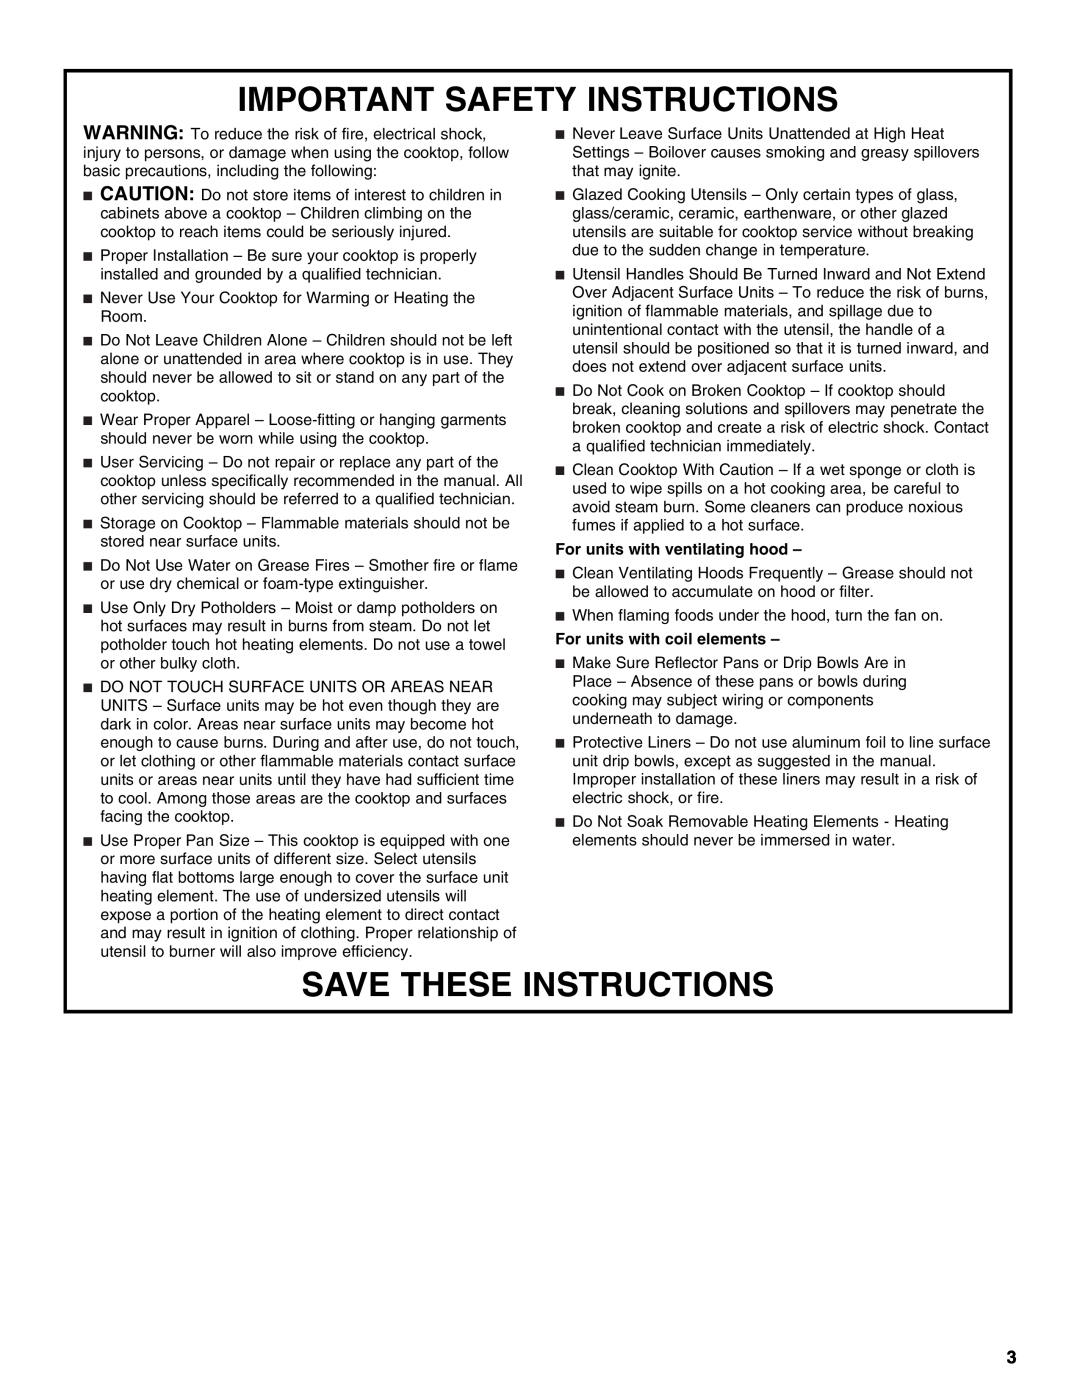 Whirlpool 8286619 manual Important Safety Instructions, Save These Instructions, For units with ventilating hood 